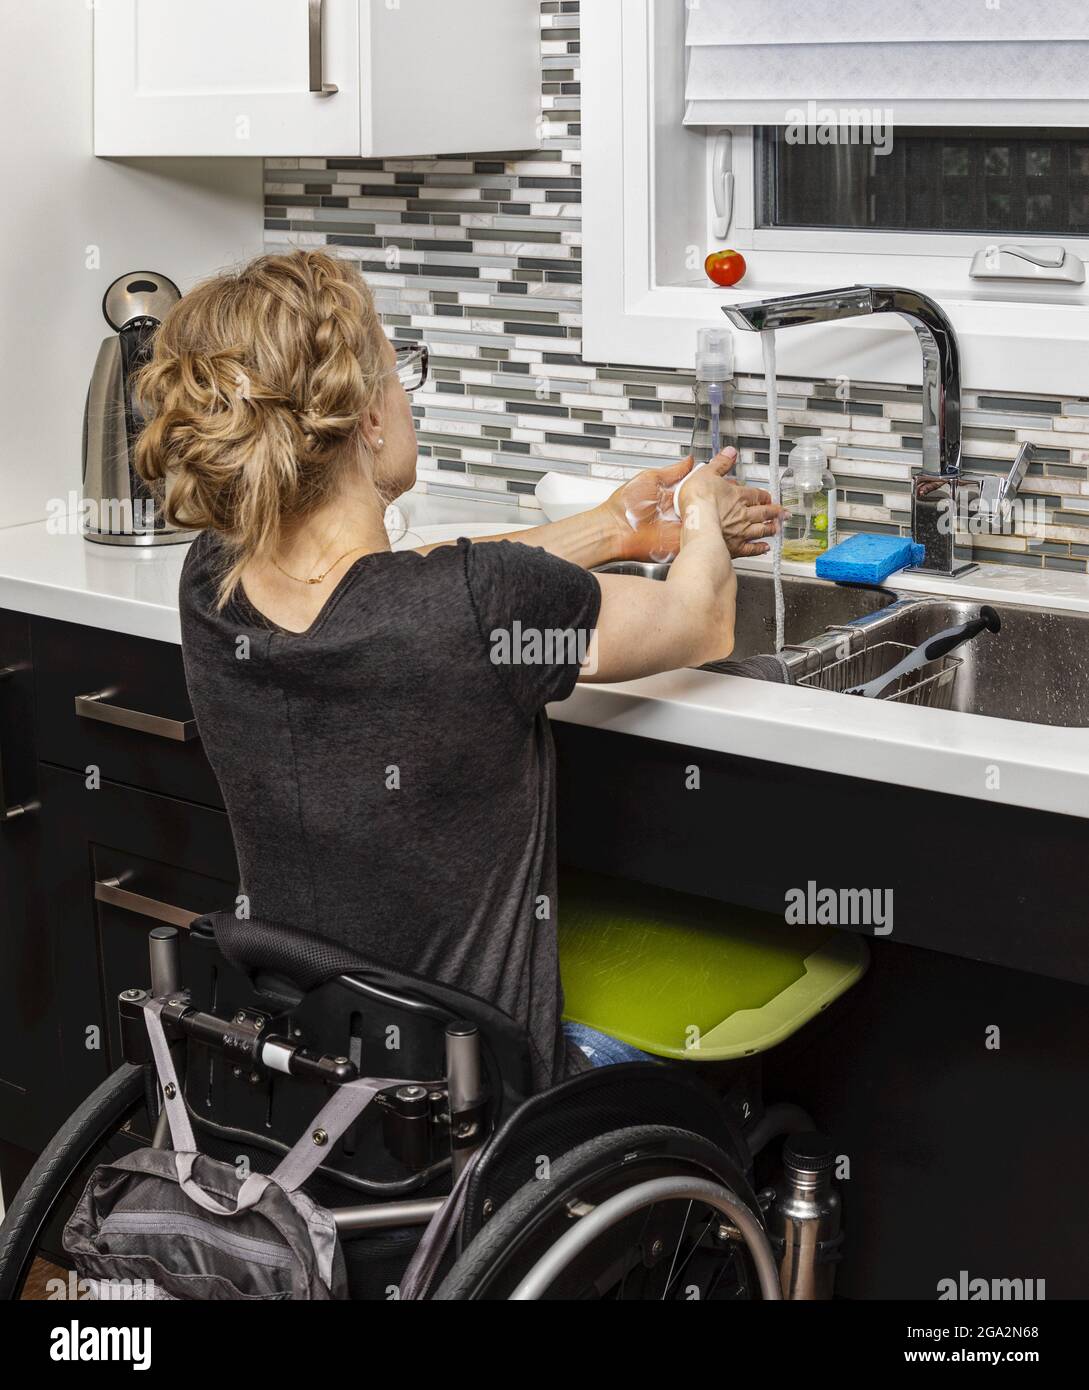 A paraplegic woman washing her hands at the sink while preparing a meal from her wheelchair; Edmonton, Alberta, Canada Stock Photo